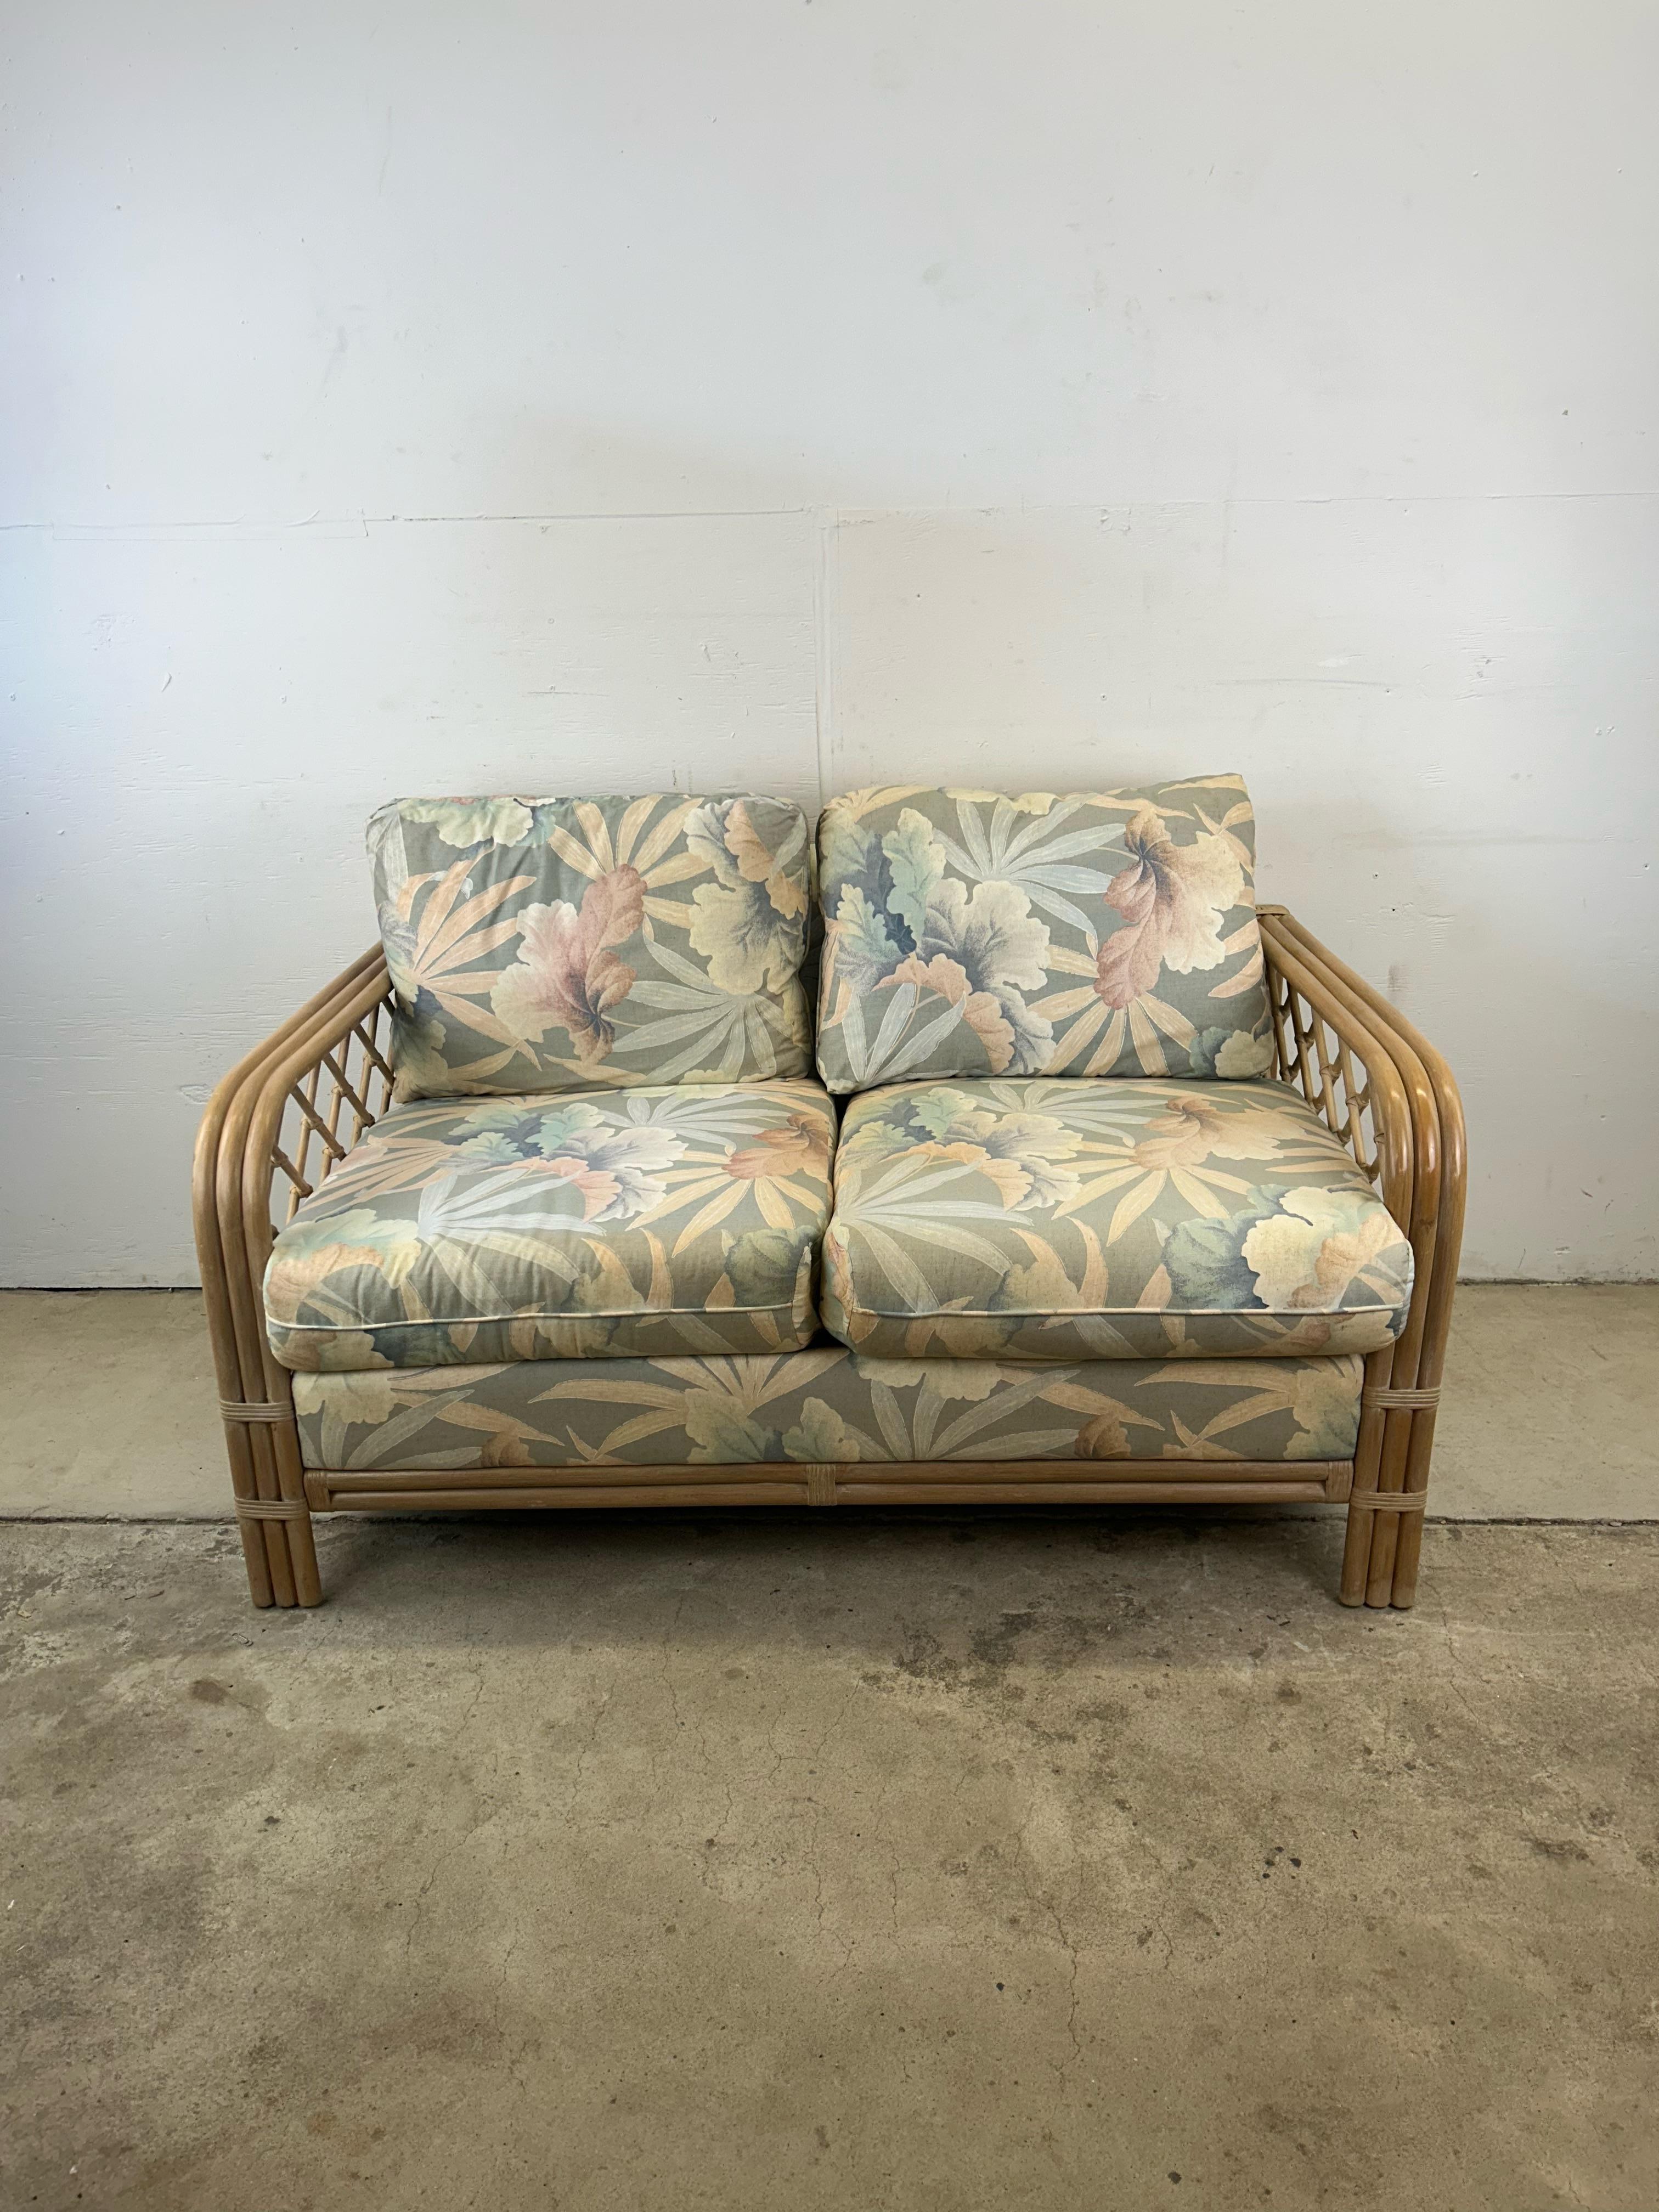 American Vintage Boho Chic Rattan Loveseat with Floral Upholstery For Sale